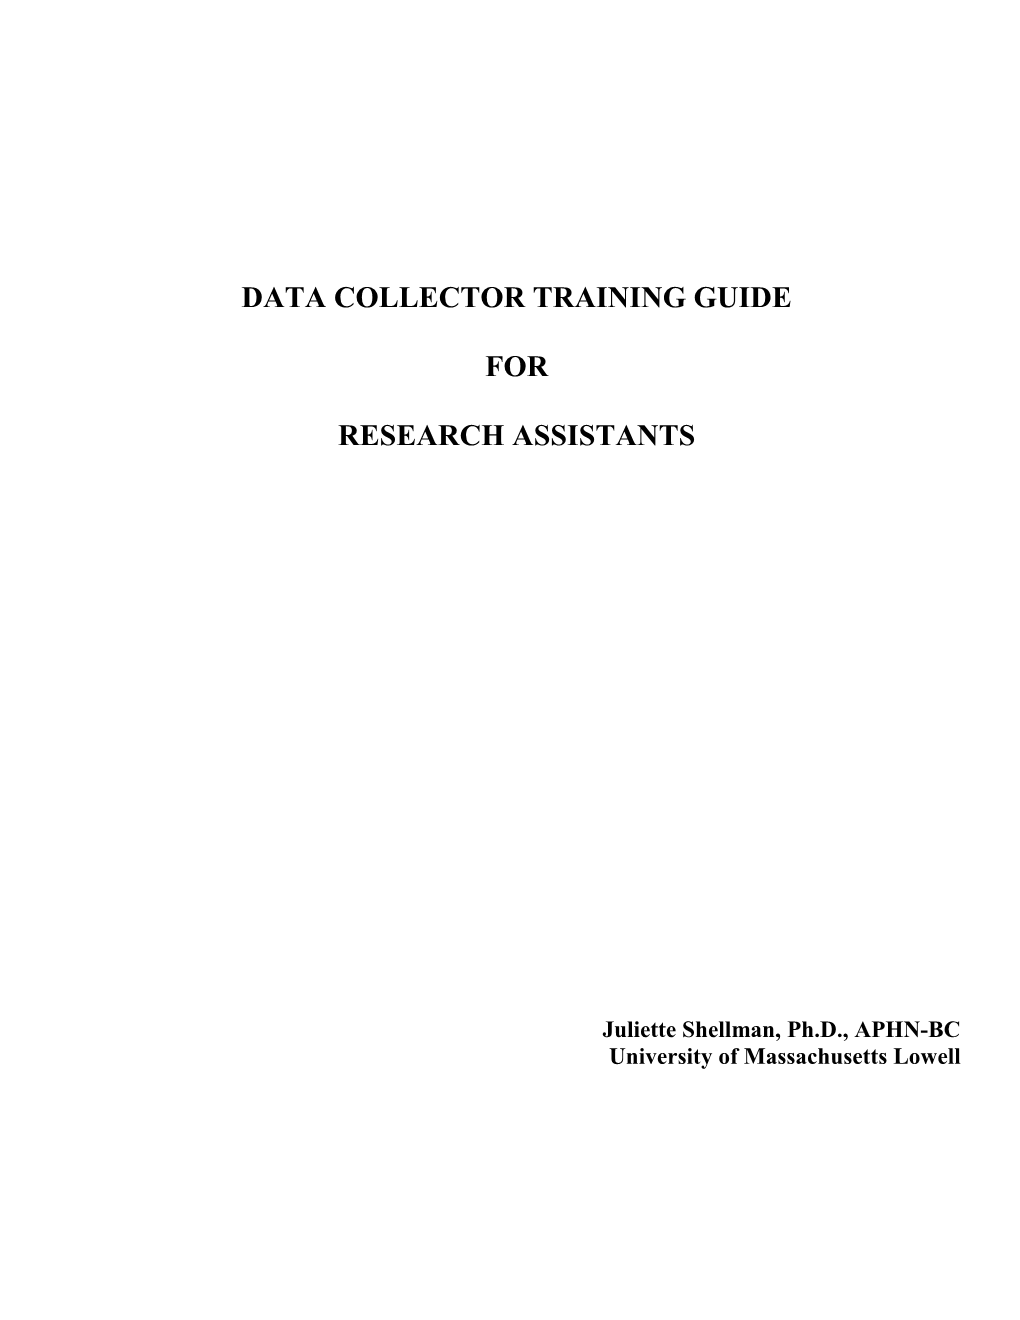 Data Collector Training Guide